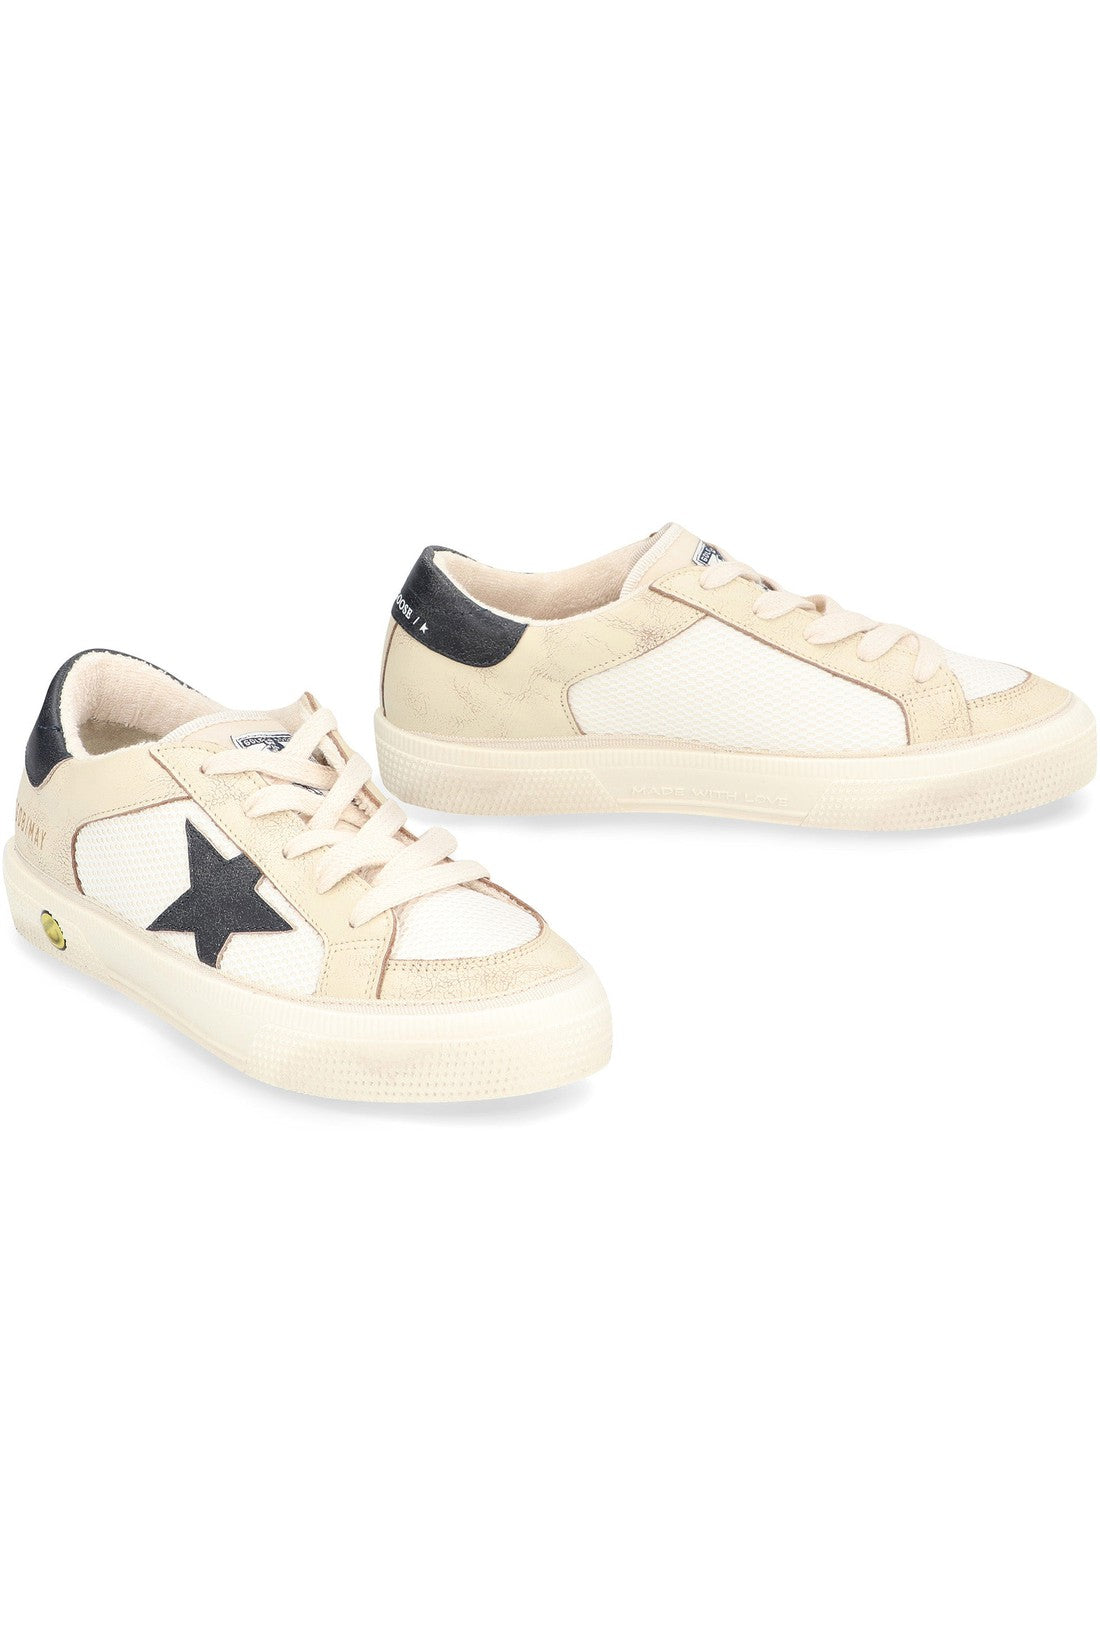 Golden Goose Kids-OUTLET-SALE-May low-top sneakers-ARCHIVIST